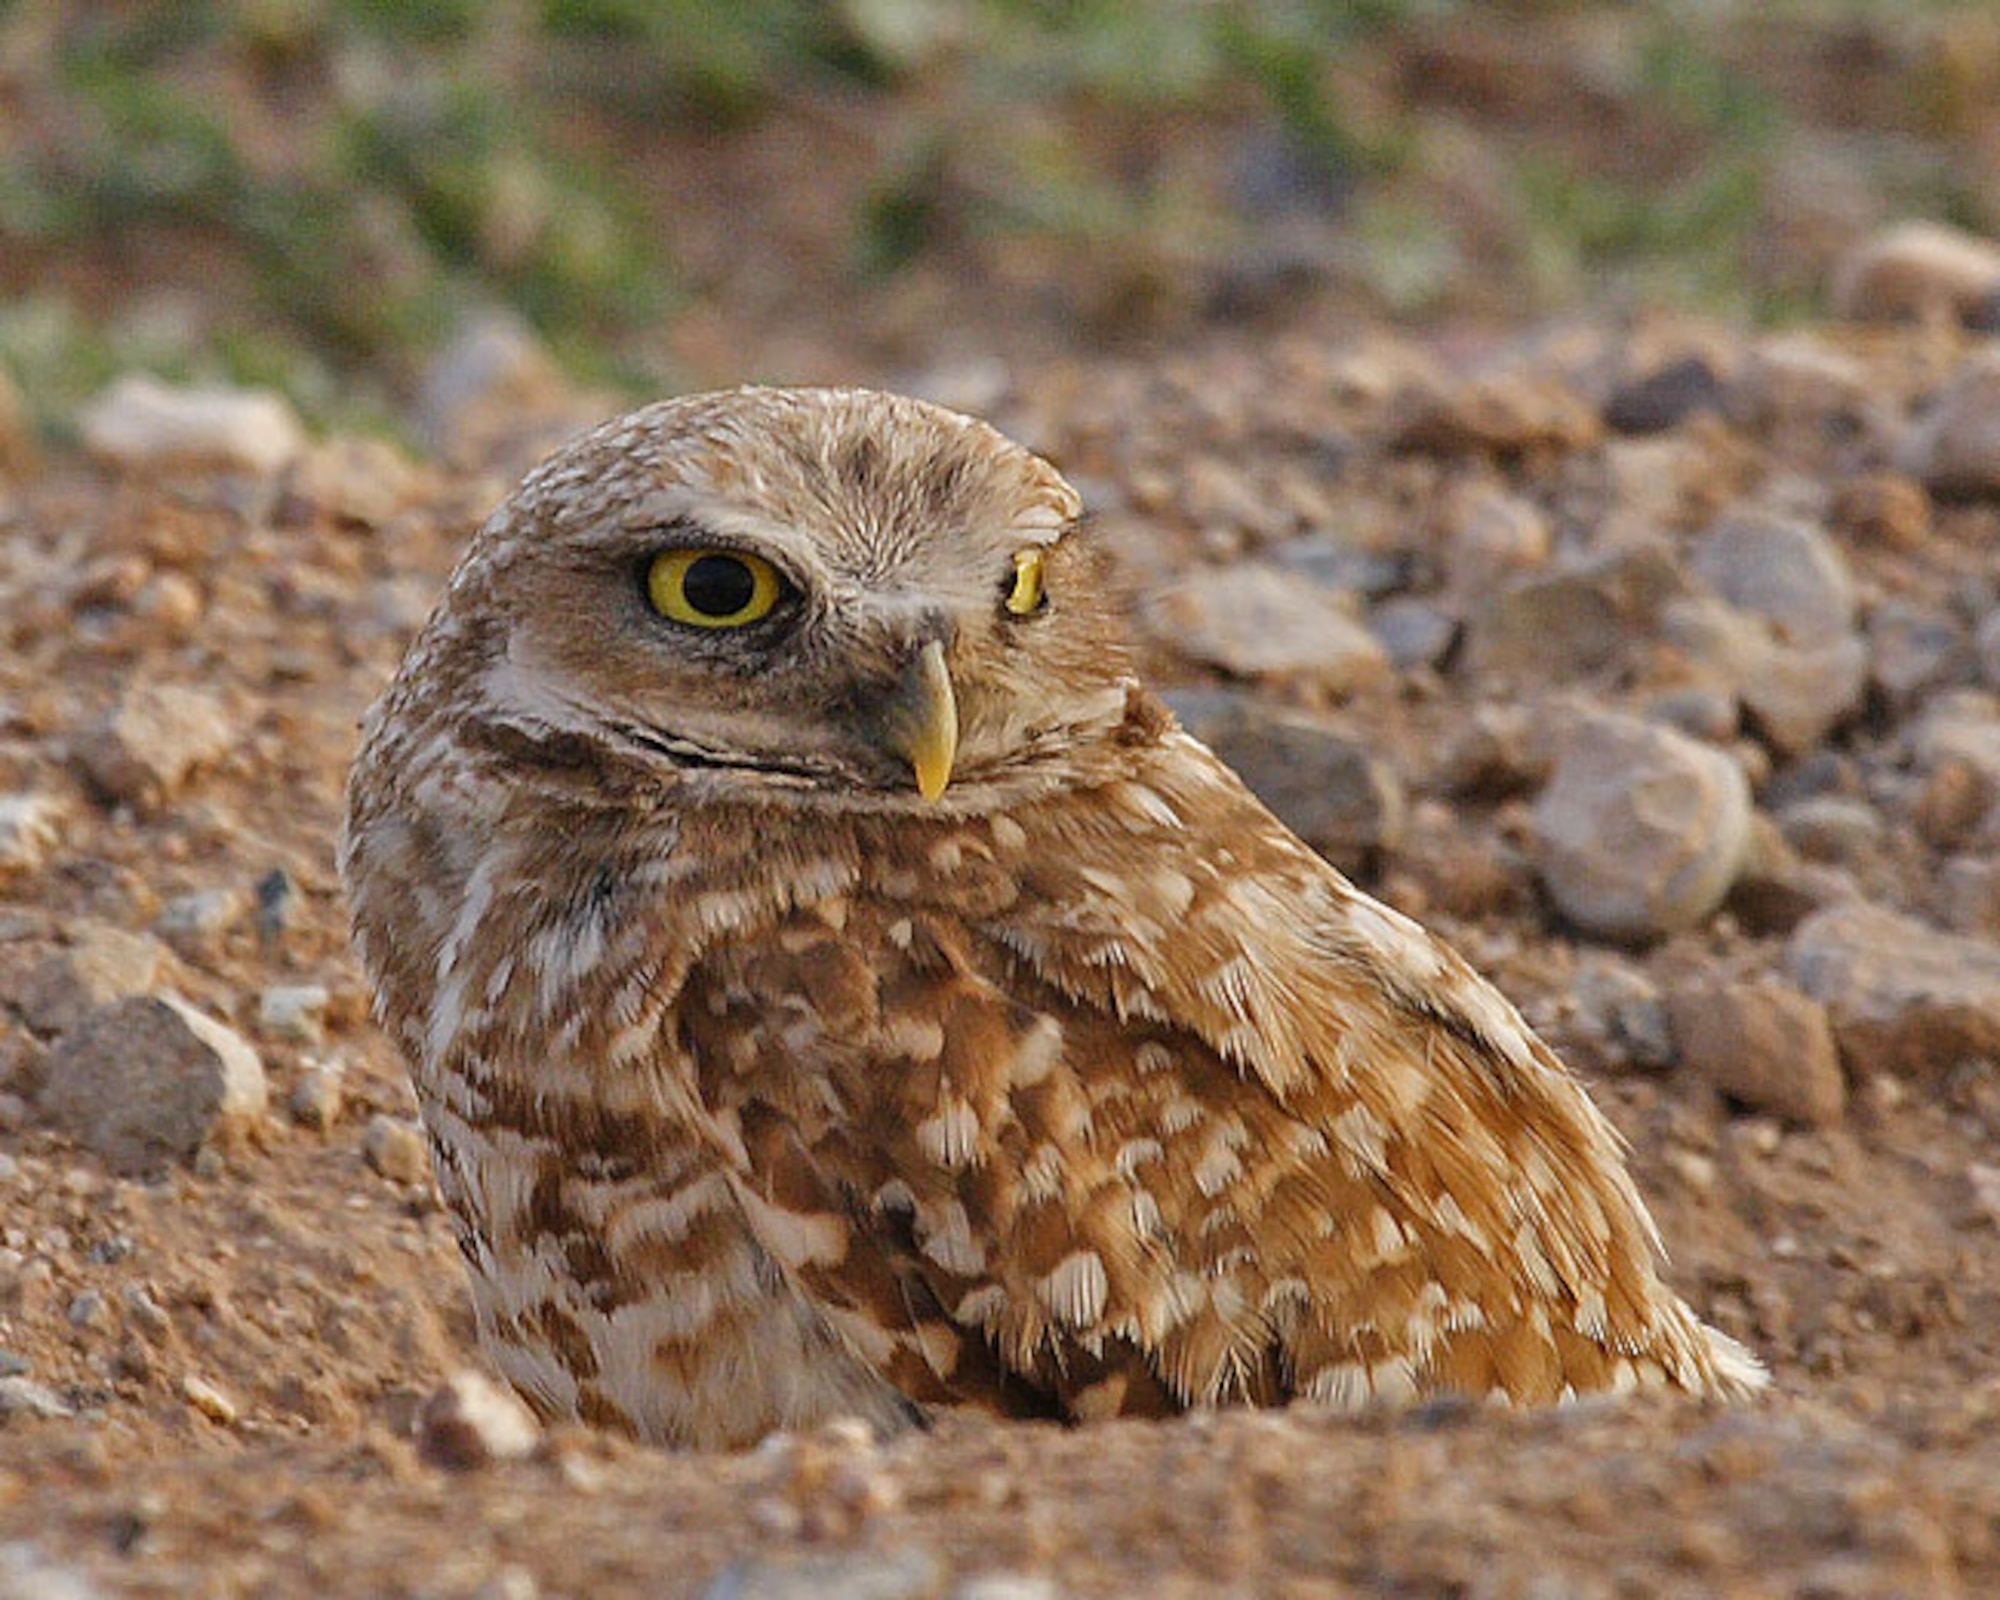 Burrowing owl sits above ground